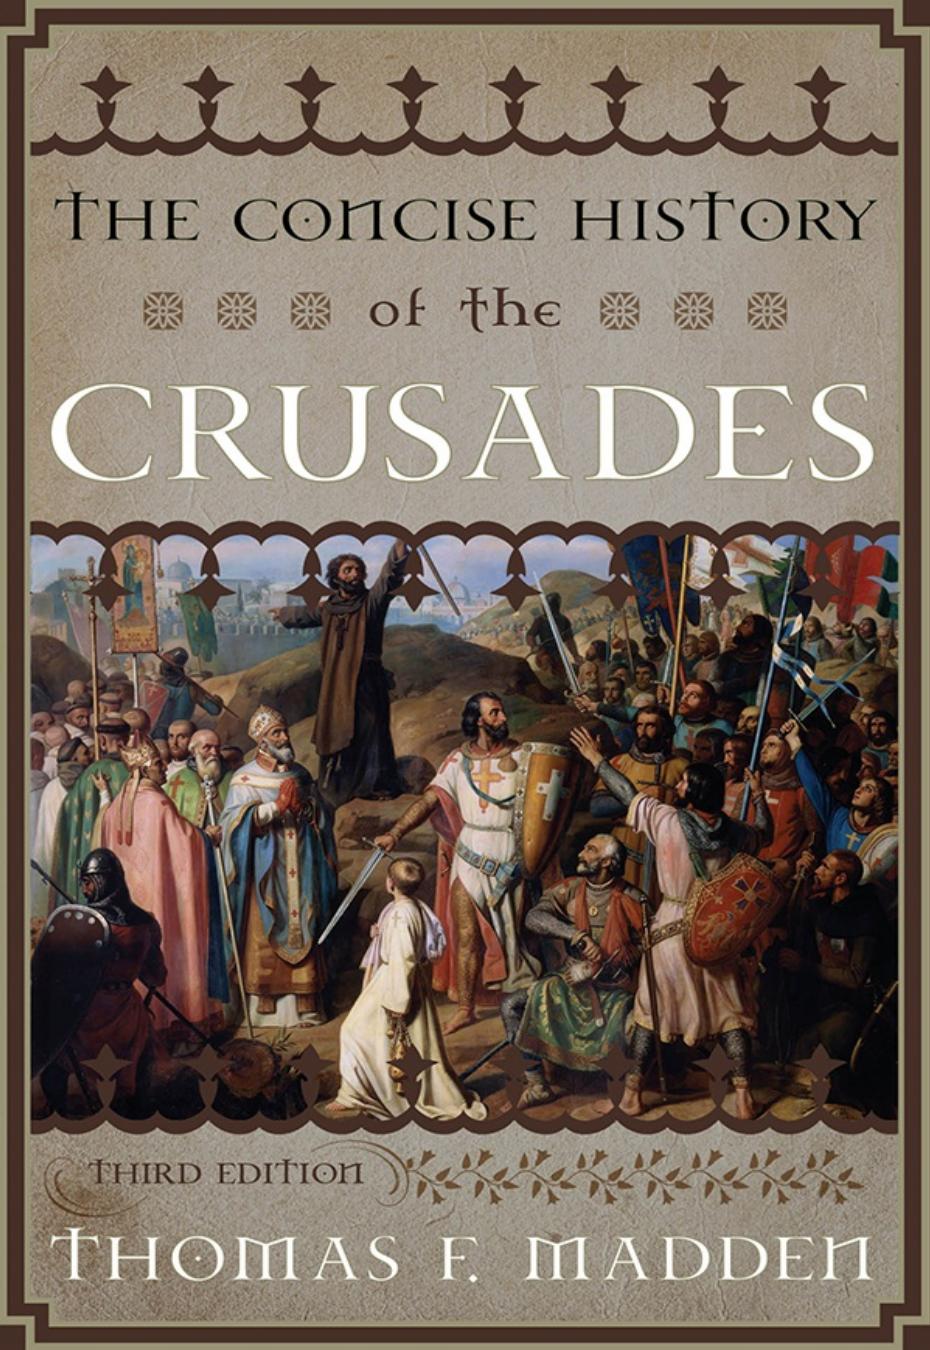 The Concise History of the Crusades (Critical Issues in World and International History) by Thomas F. Madden